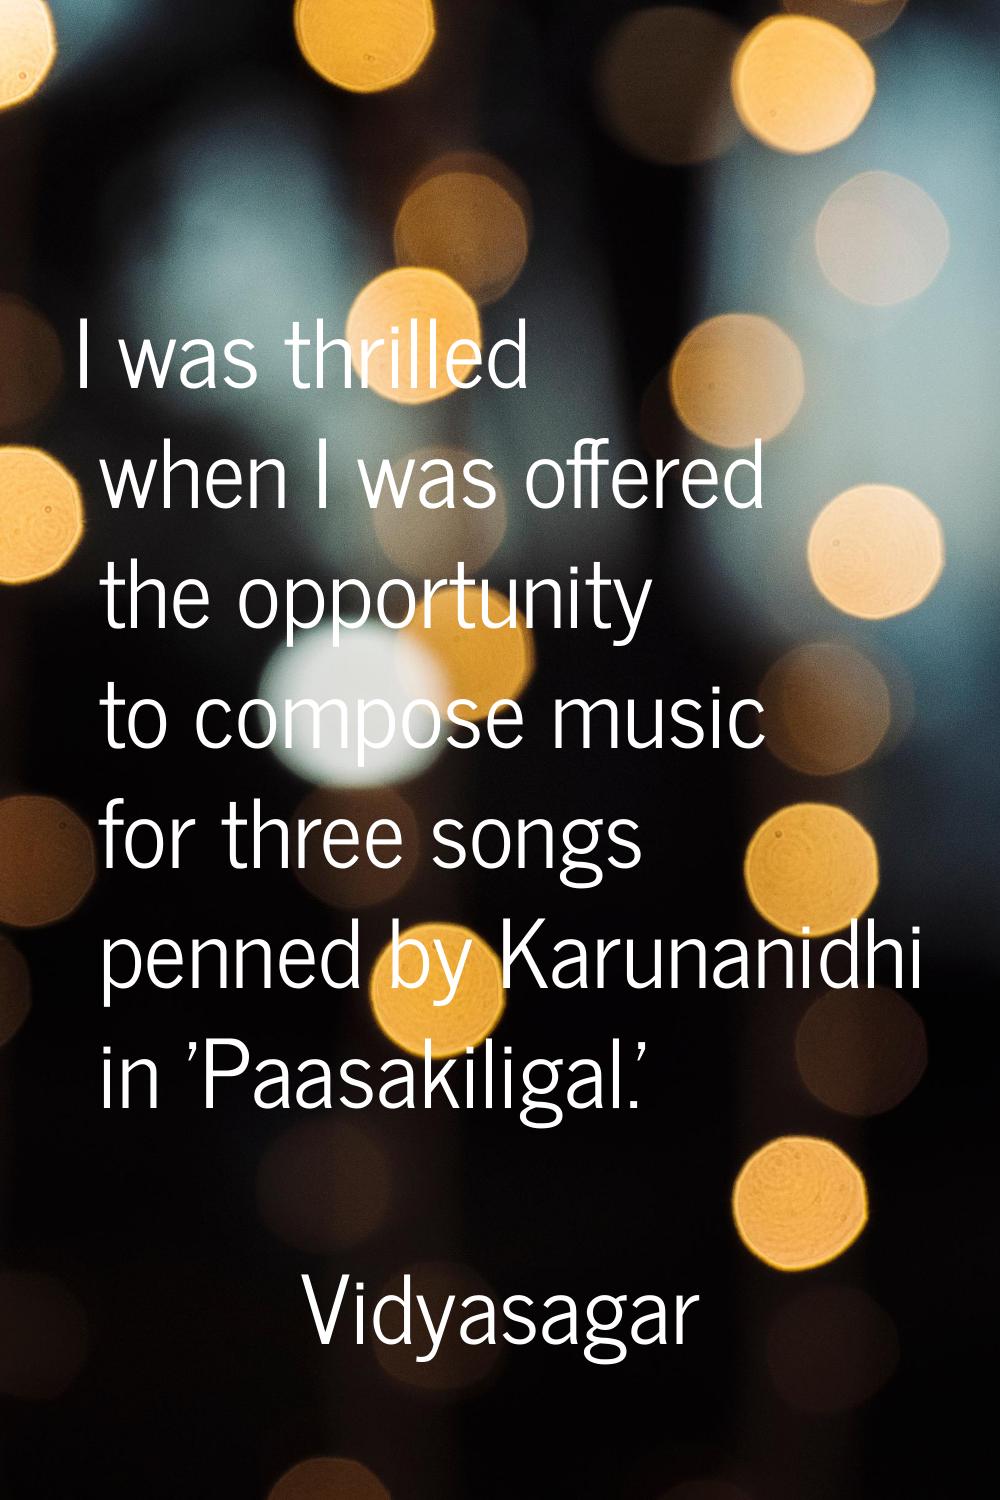 I was thrilled when I was offered the opportunity to compose music for three songs penned by Karuna